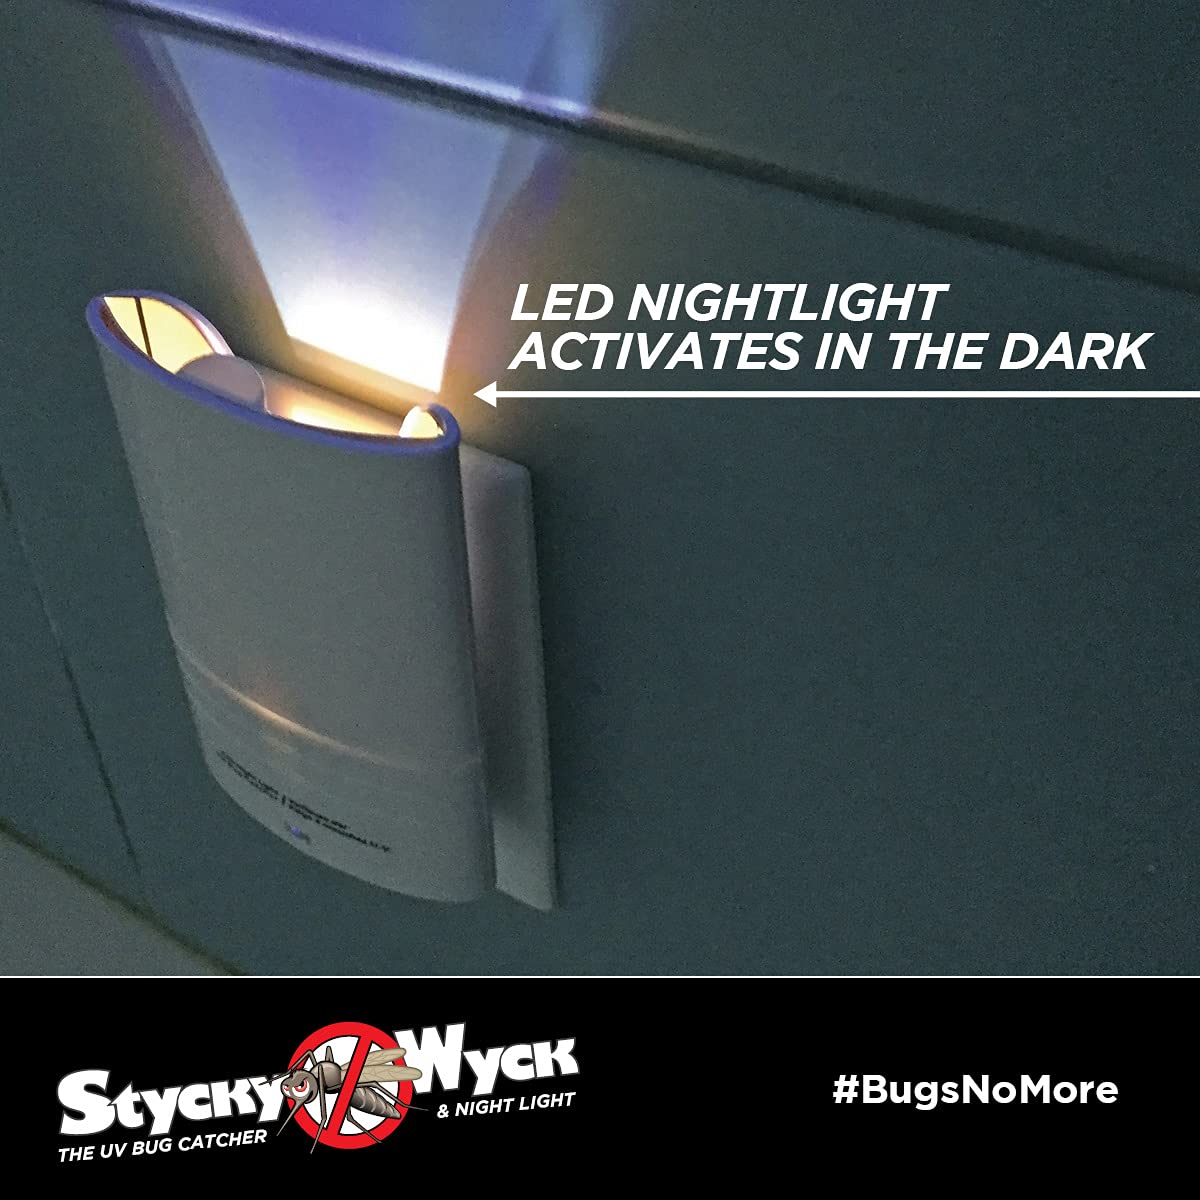 Stycky Wyck LED UV Bug Catcher (Multi-Pack) - Plug in Bug Catcher - Night Light - Safe for Indoor Use - Adhesive Inserts Included